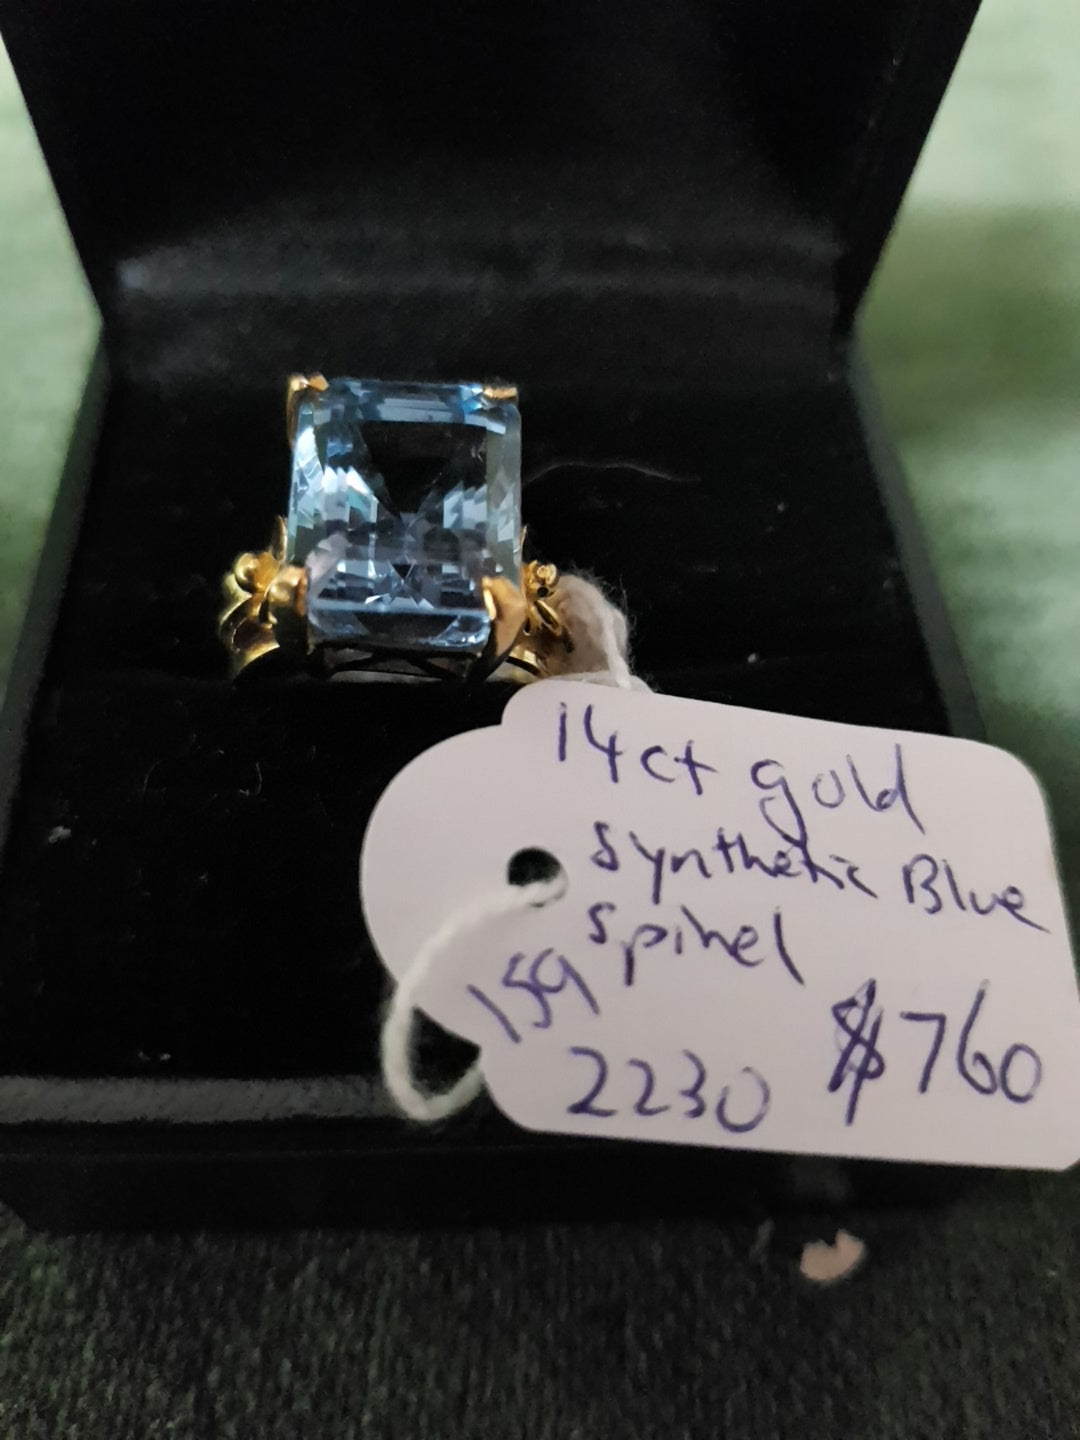 14ct Gold and synthetic blue Spinel ring #159